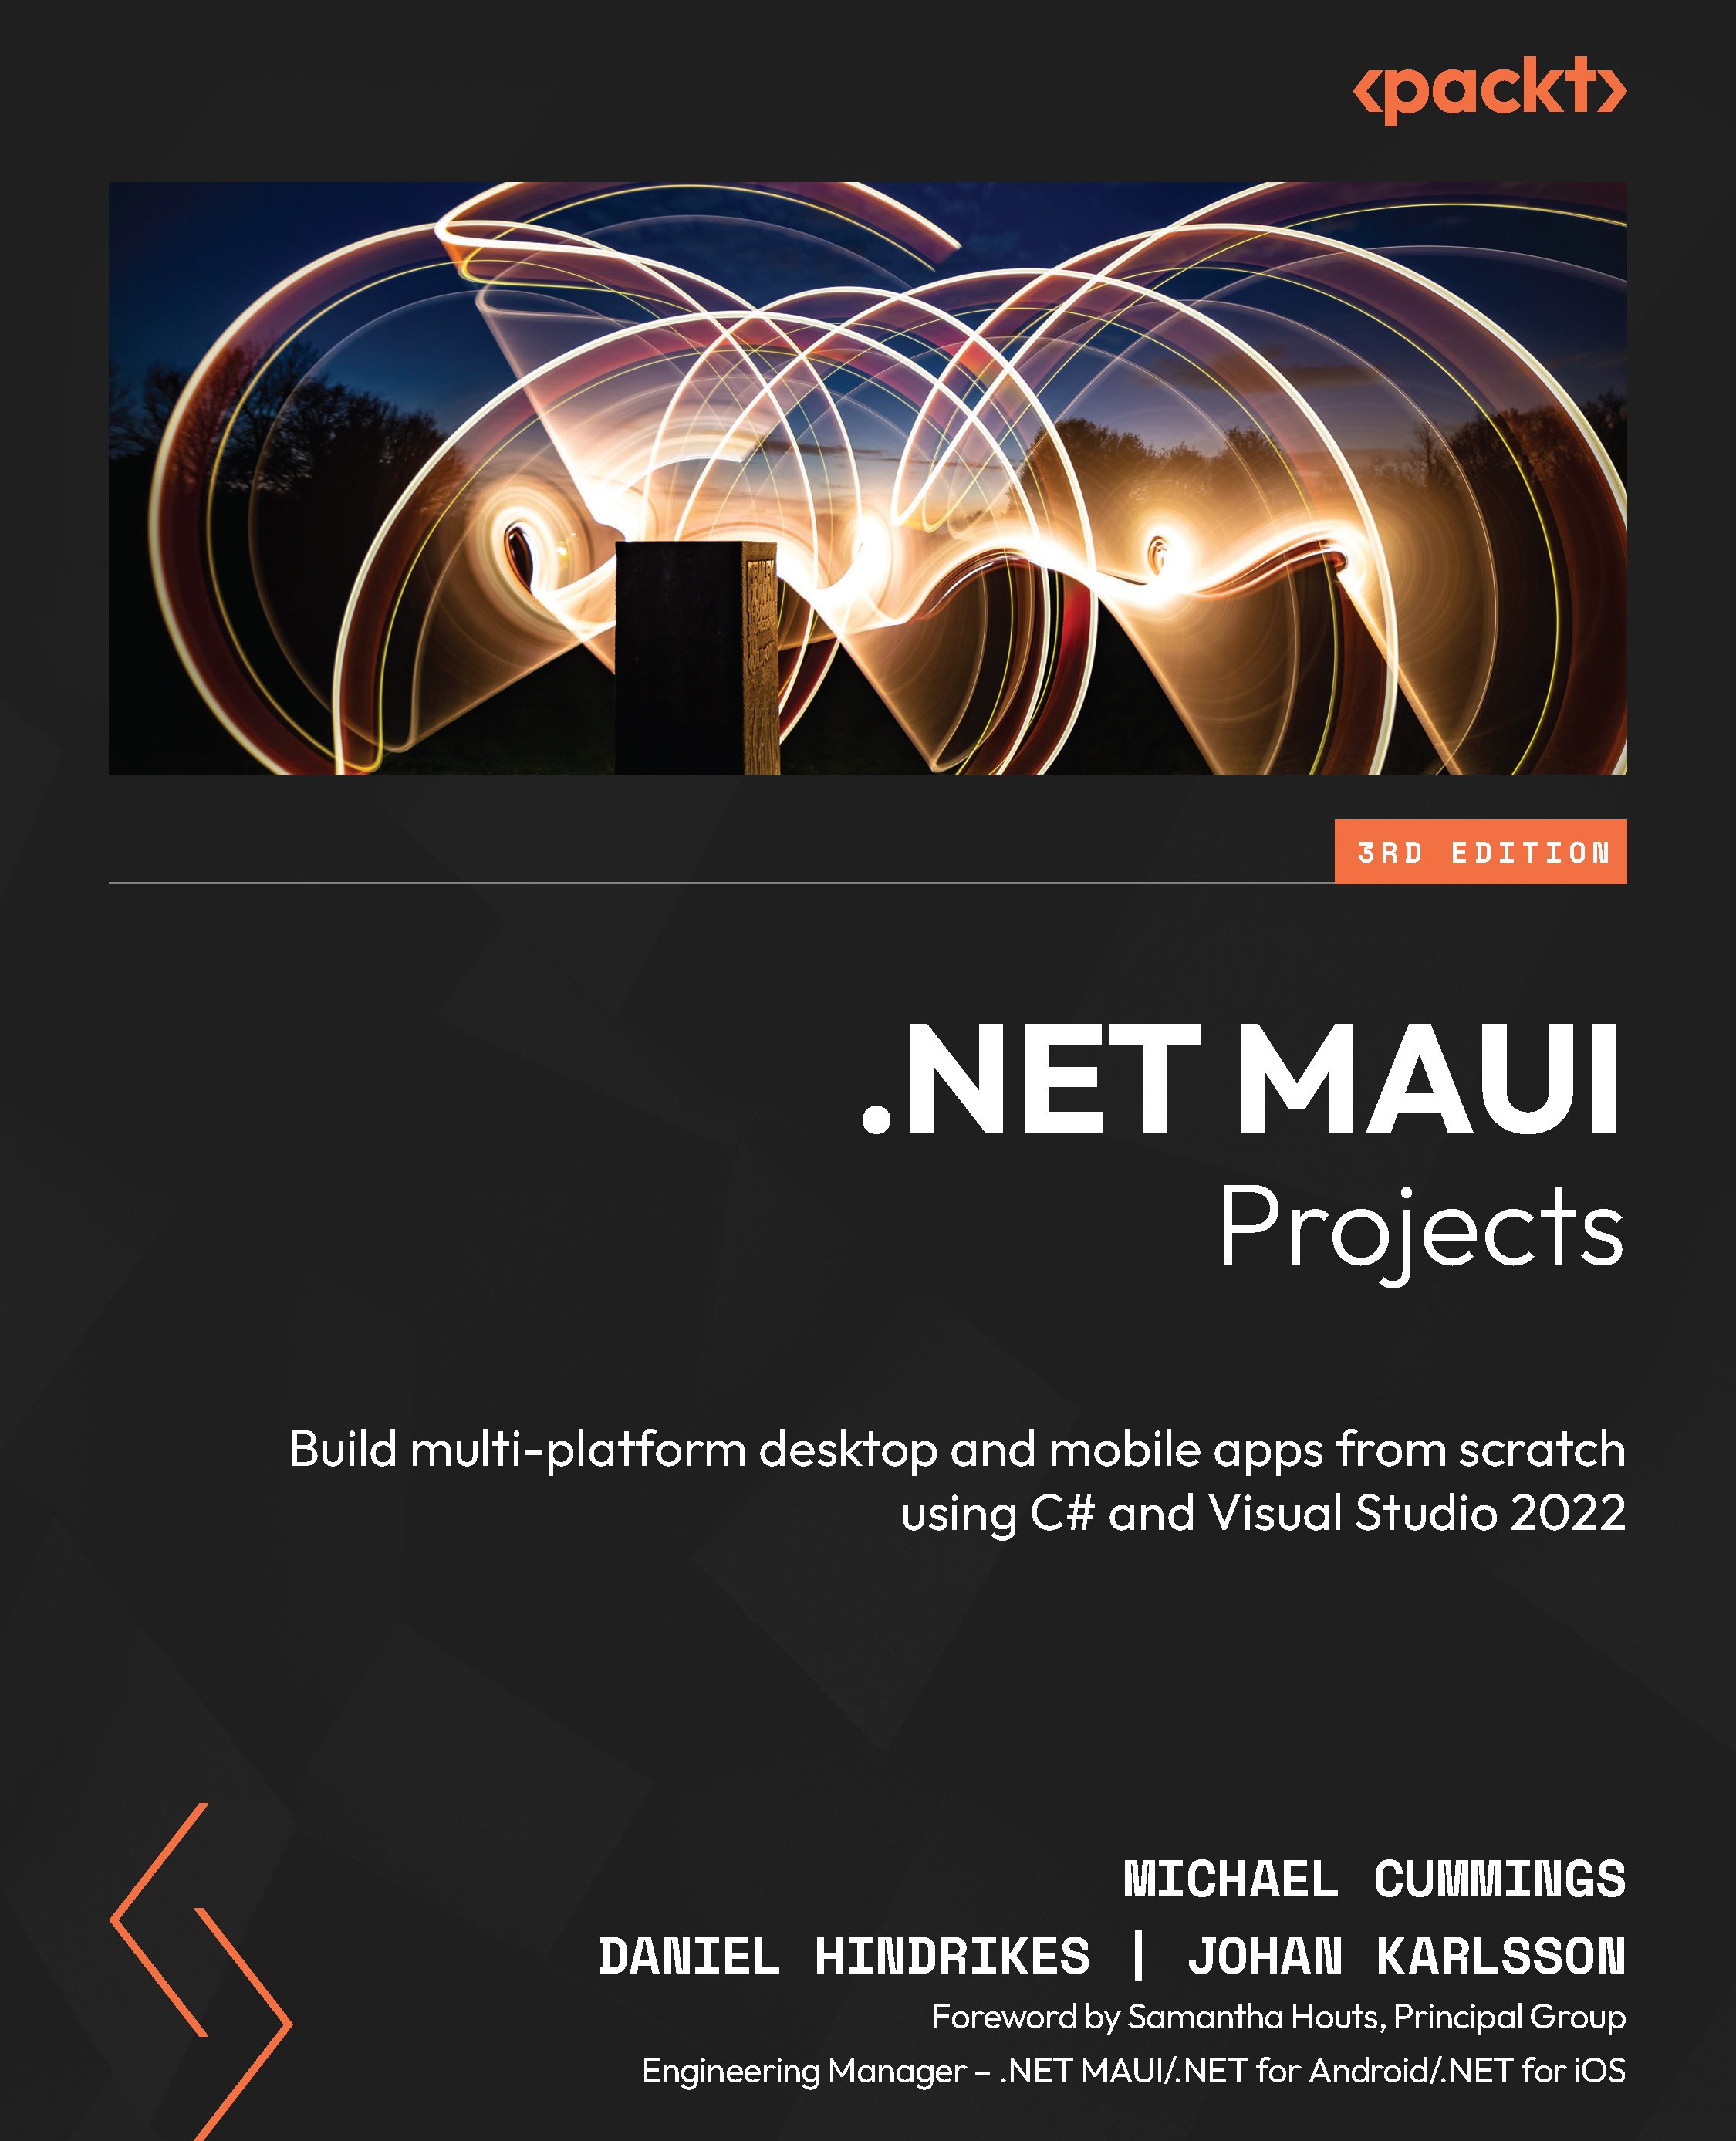 .NET MAUI Projects: Build multi-platform desktop and mobile apps from scratch using C# and Visual Studio 2022, Third Edition